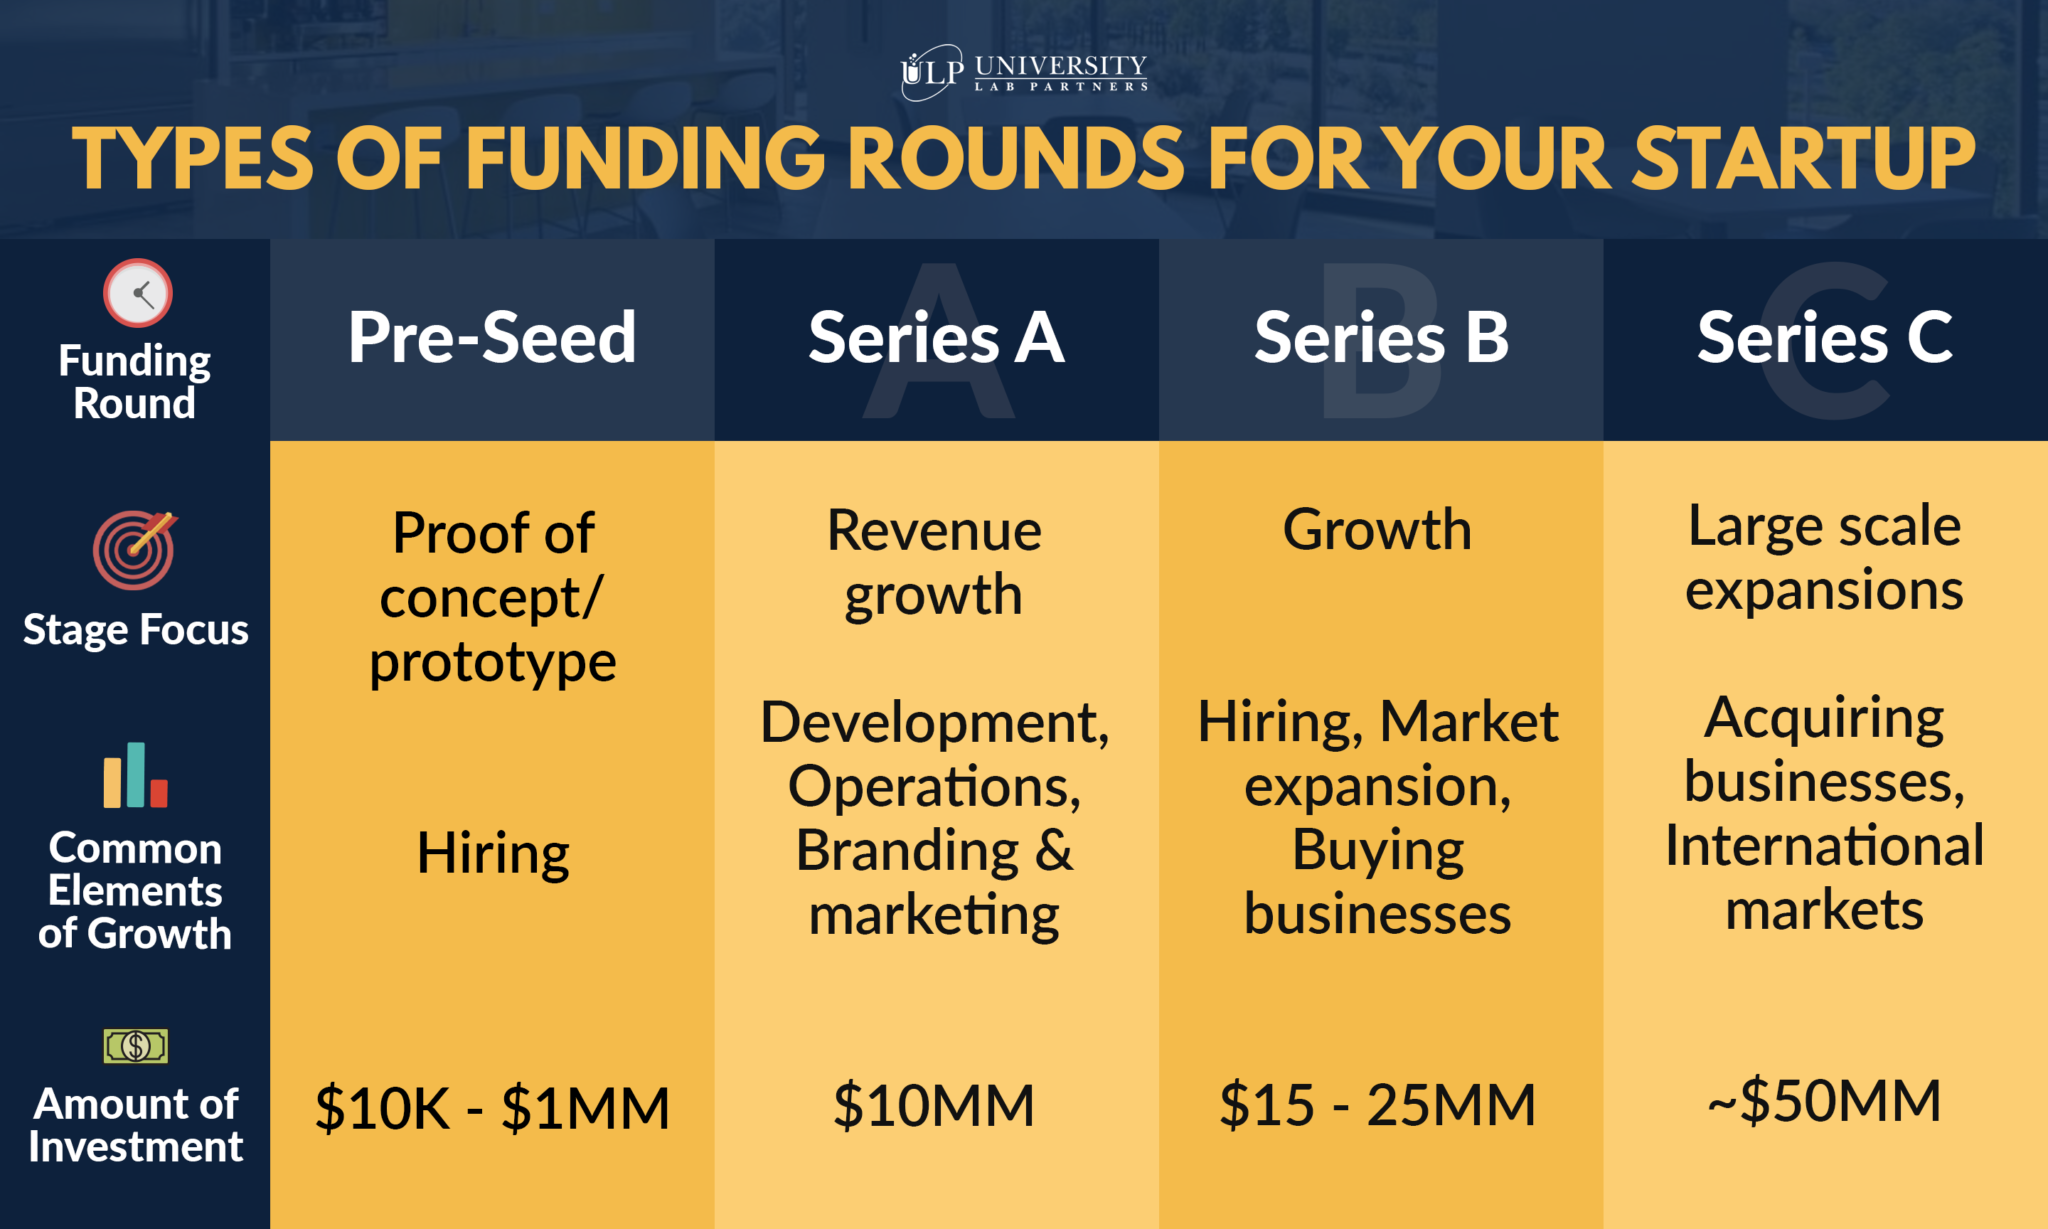 How Series A, B, & C Funding Works for Your Startup